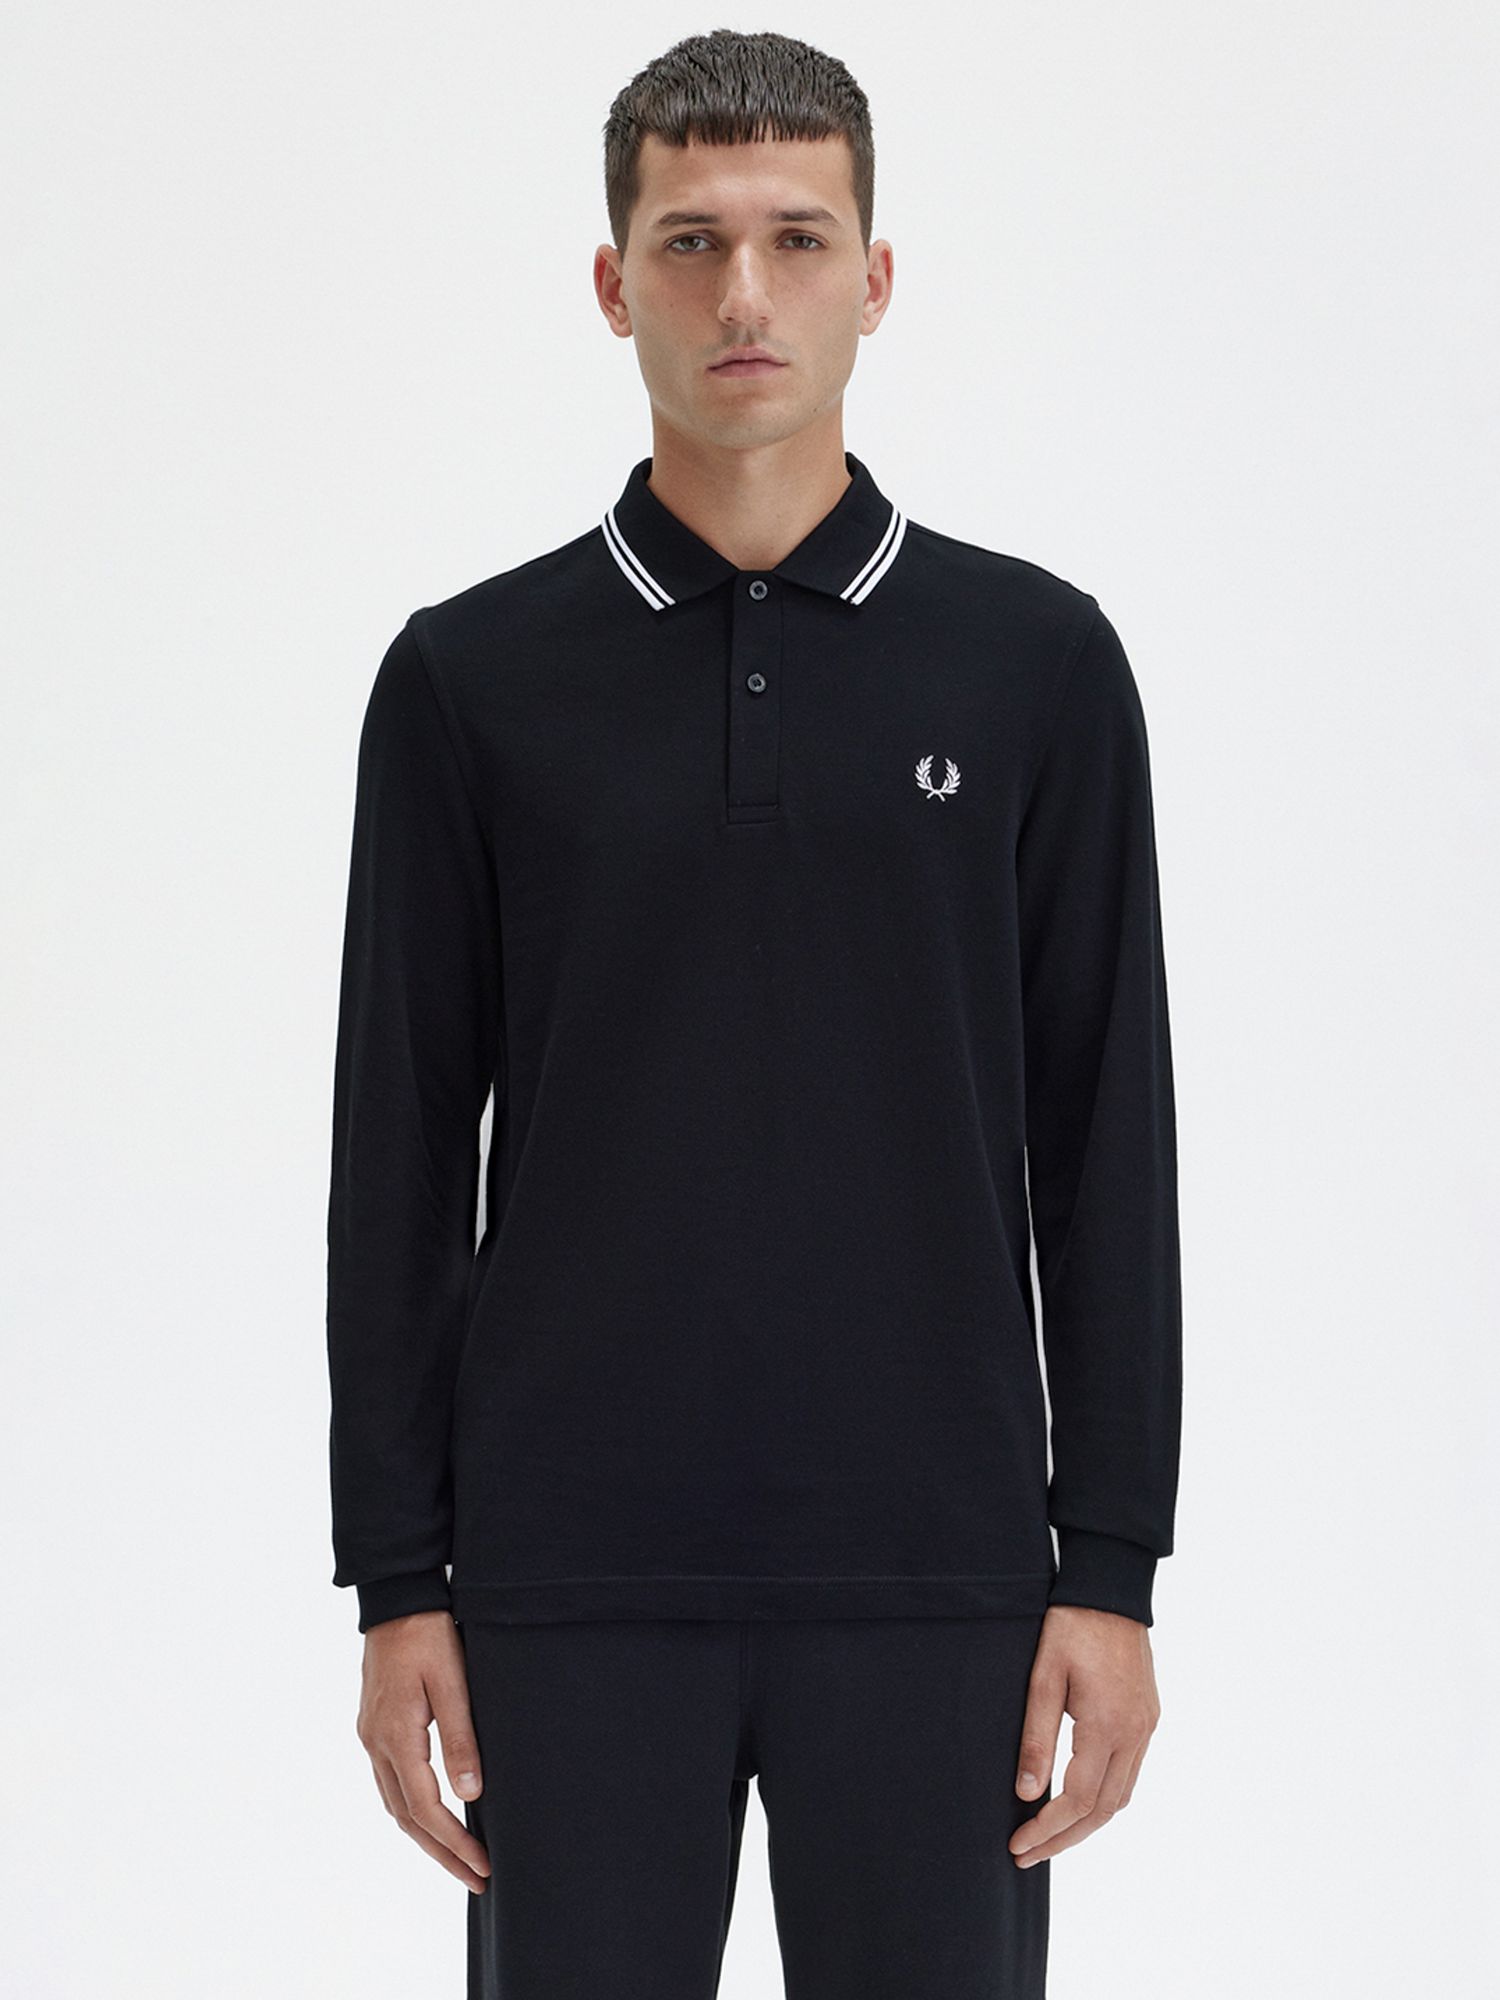 Fred Perry Twin Tipped Long Sleeve Polo Shirt, Black, M